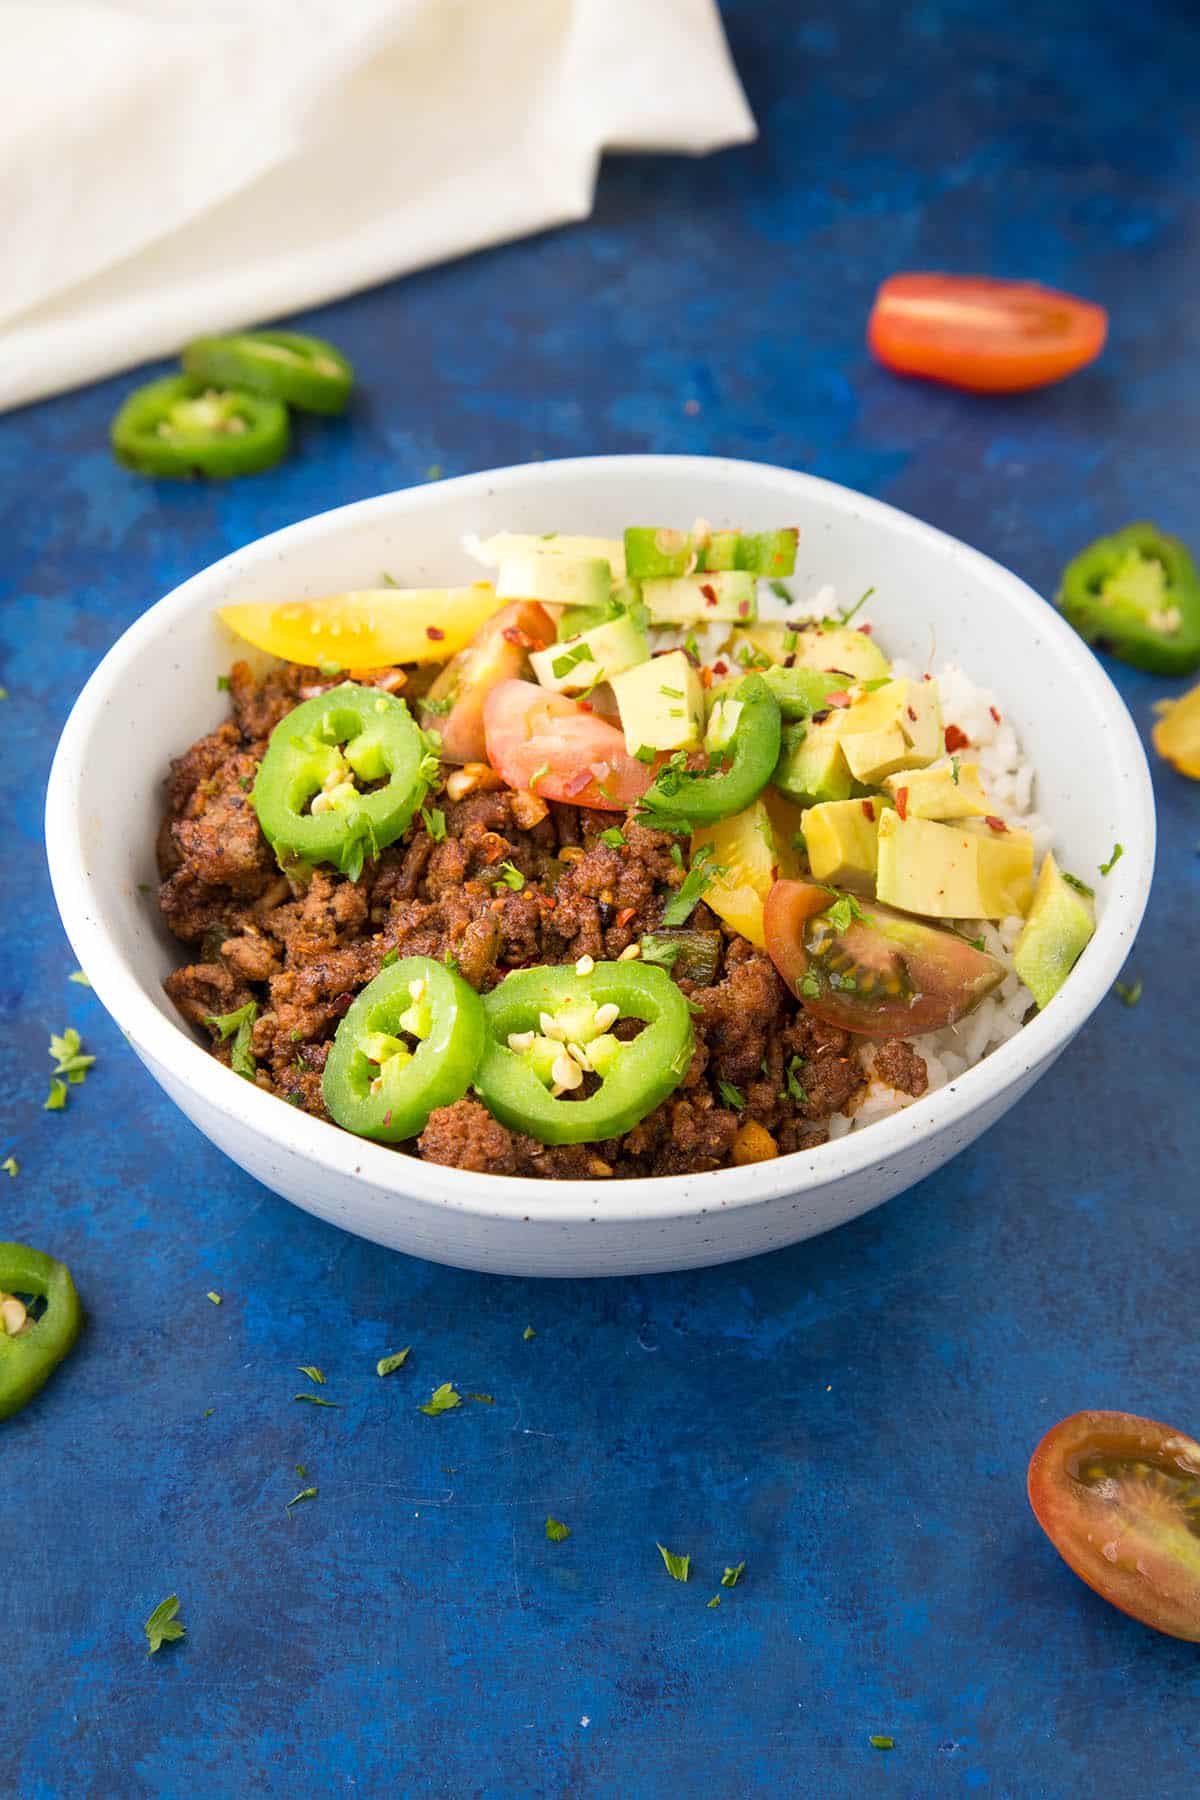 Easy Taco Bowls are ready in 20 minutes. Here is the recipe.